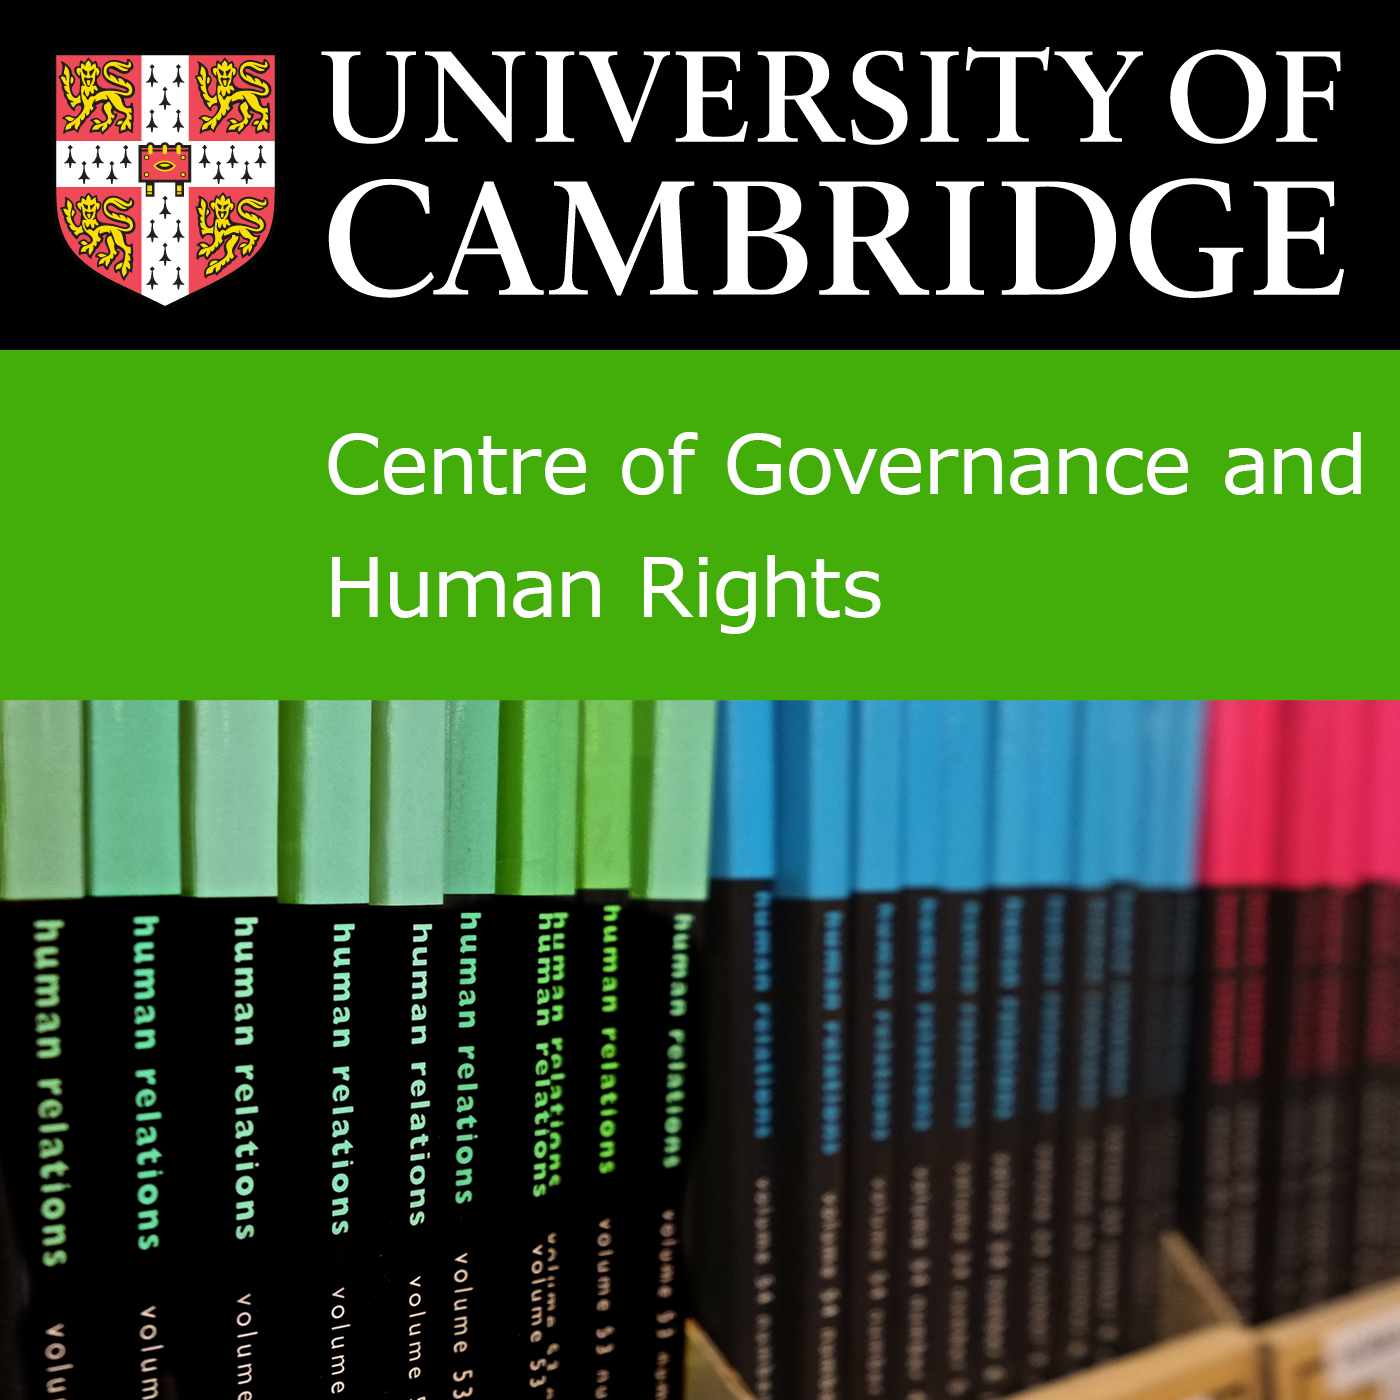 Centre of Governance and Human Rights's image